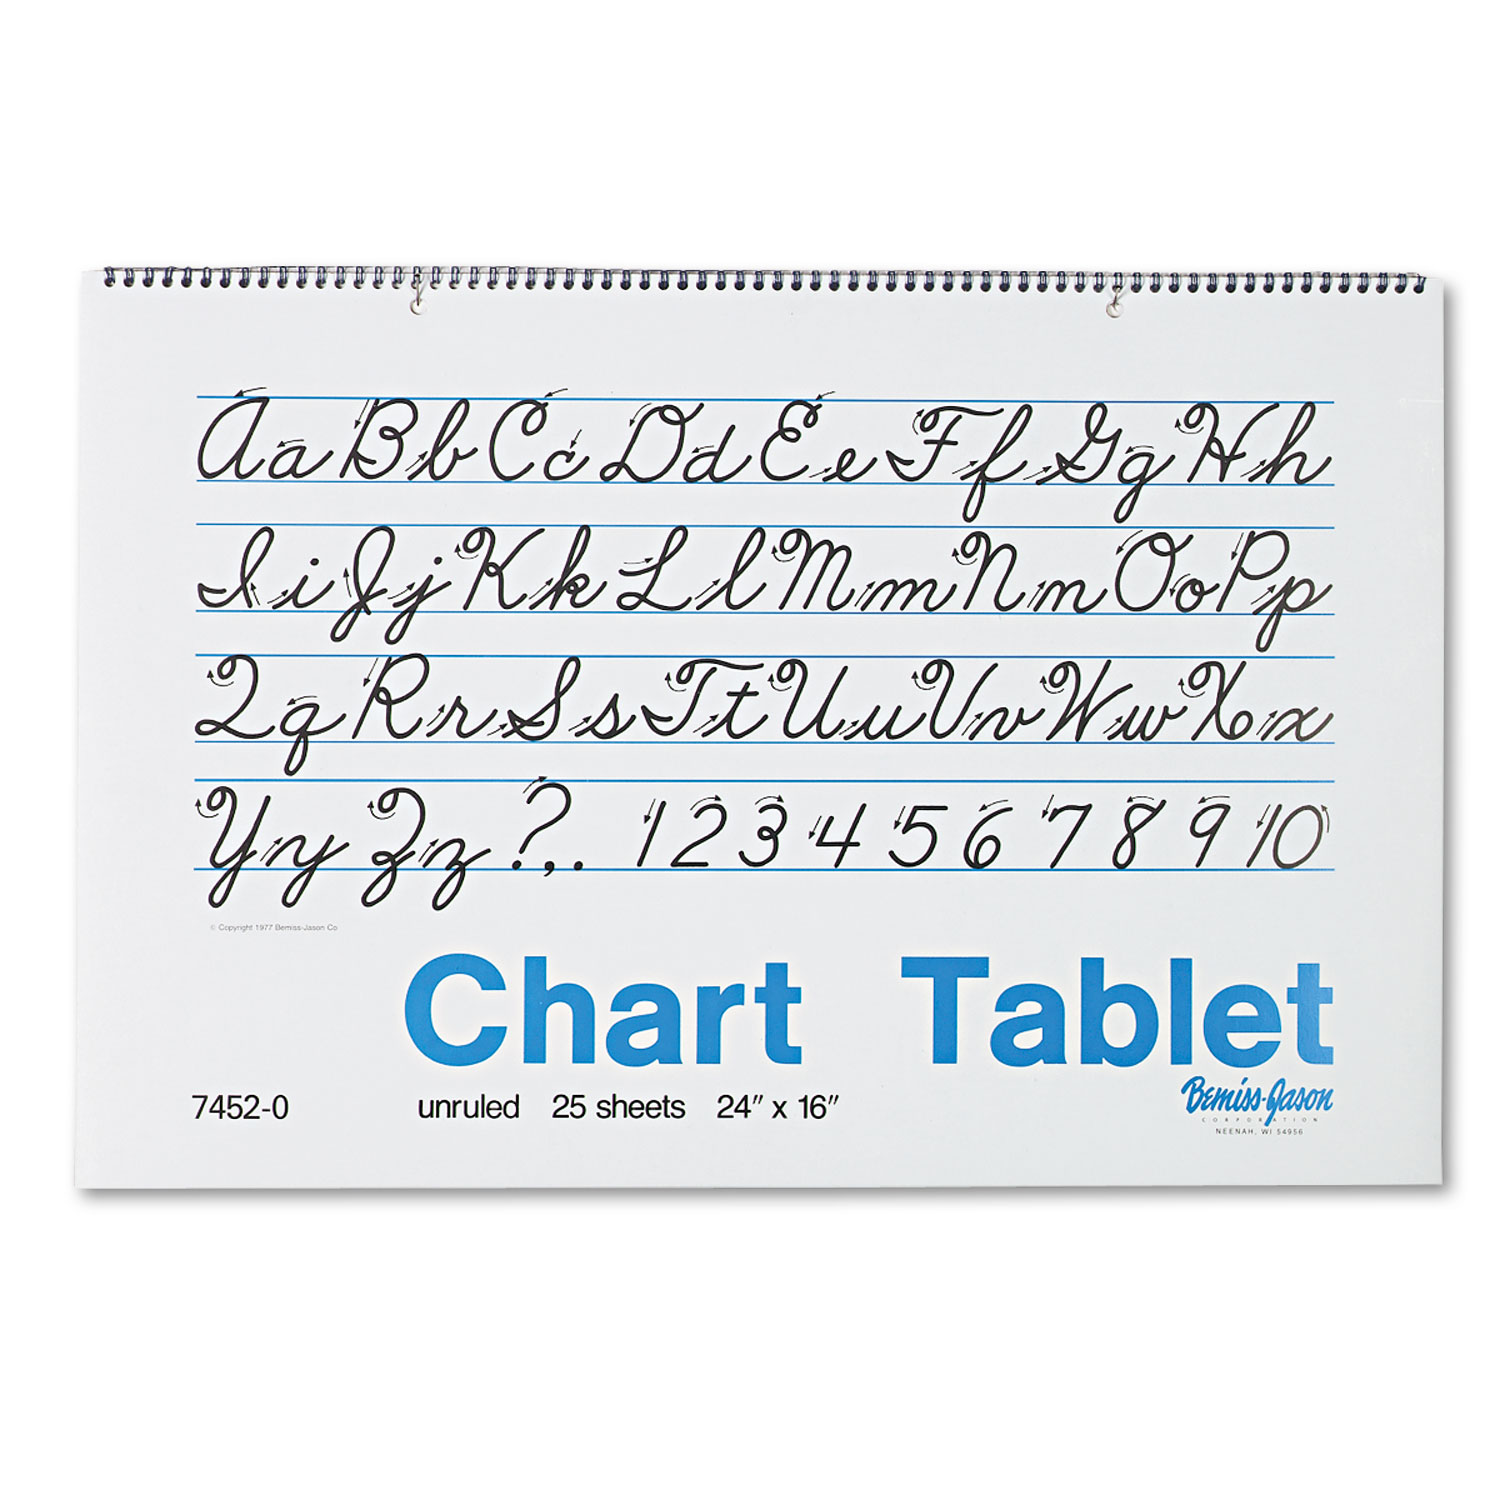  Pacon 74520 Chart Tablets, Unruled, 24 x 16, 25 Sheets (PAC74520) 